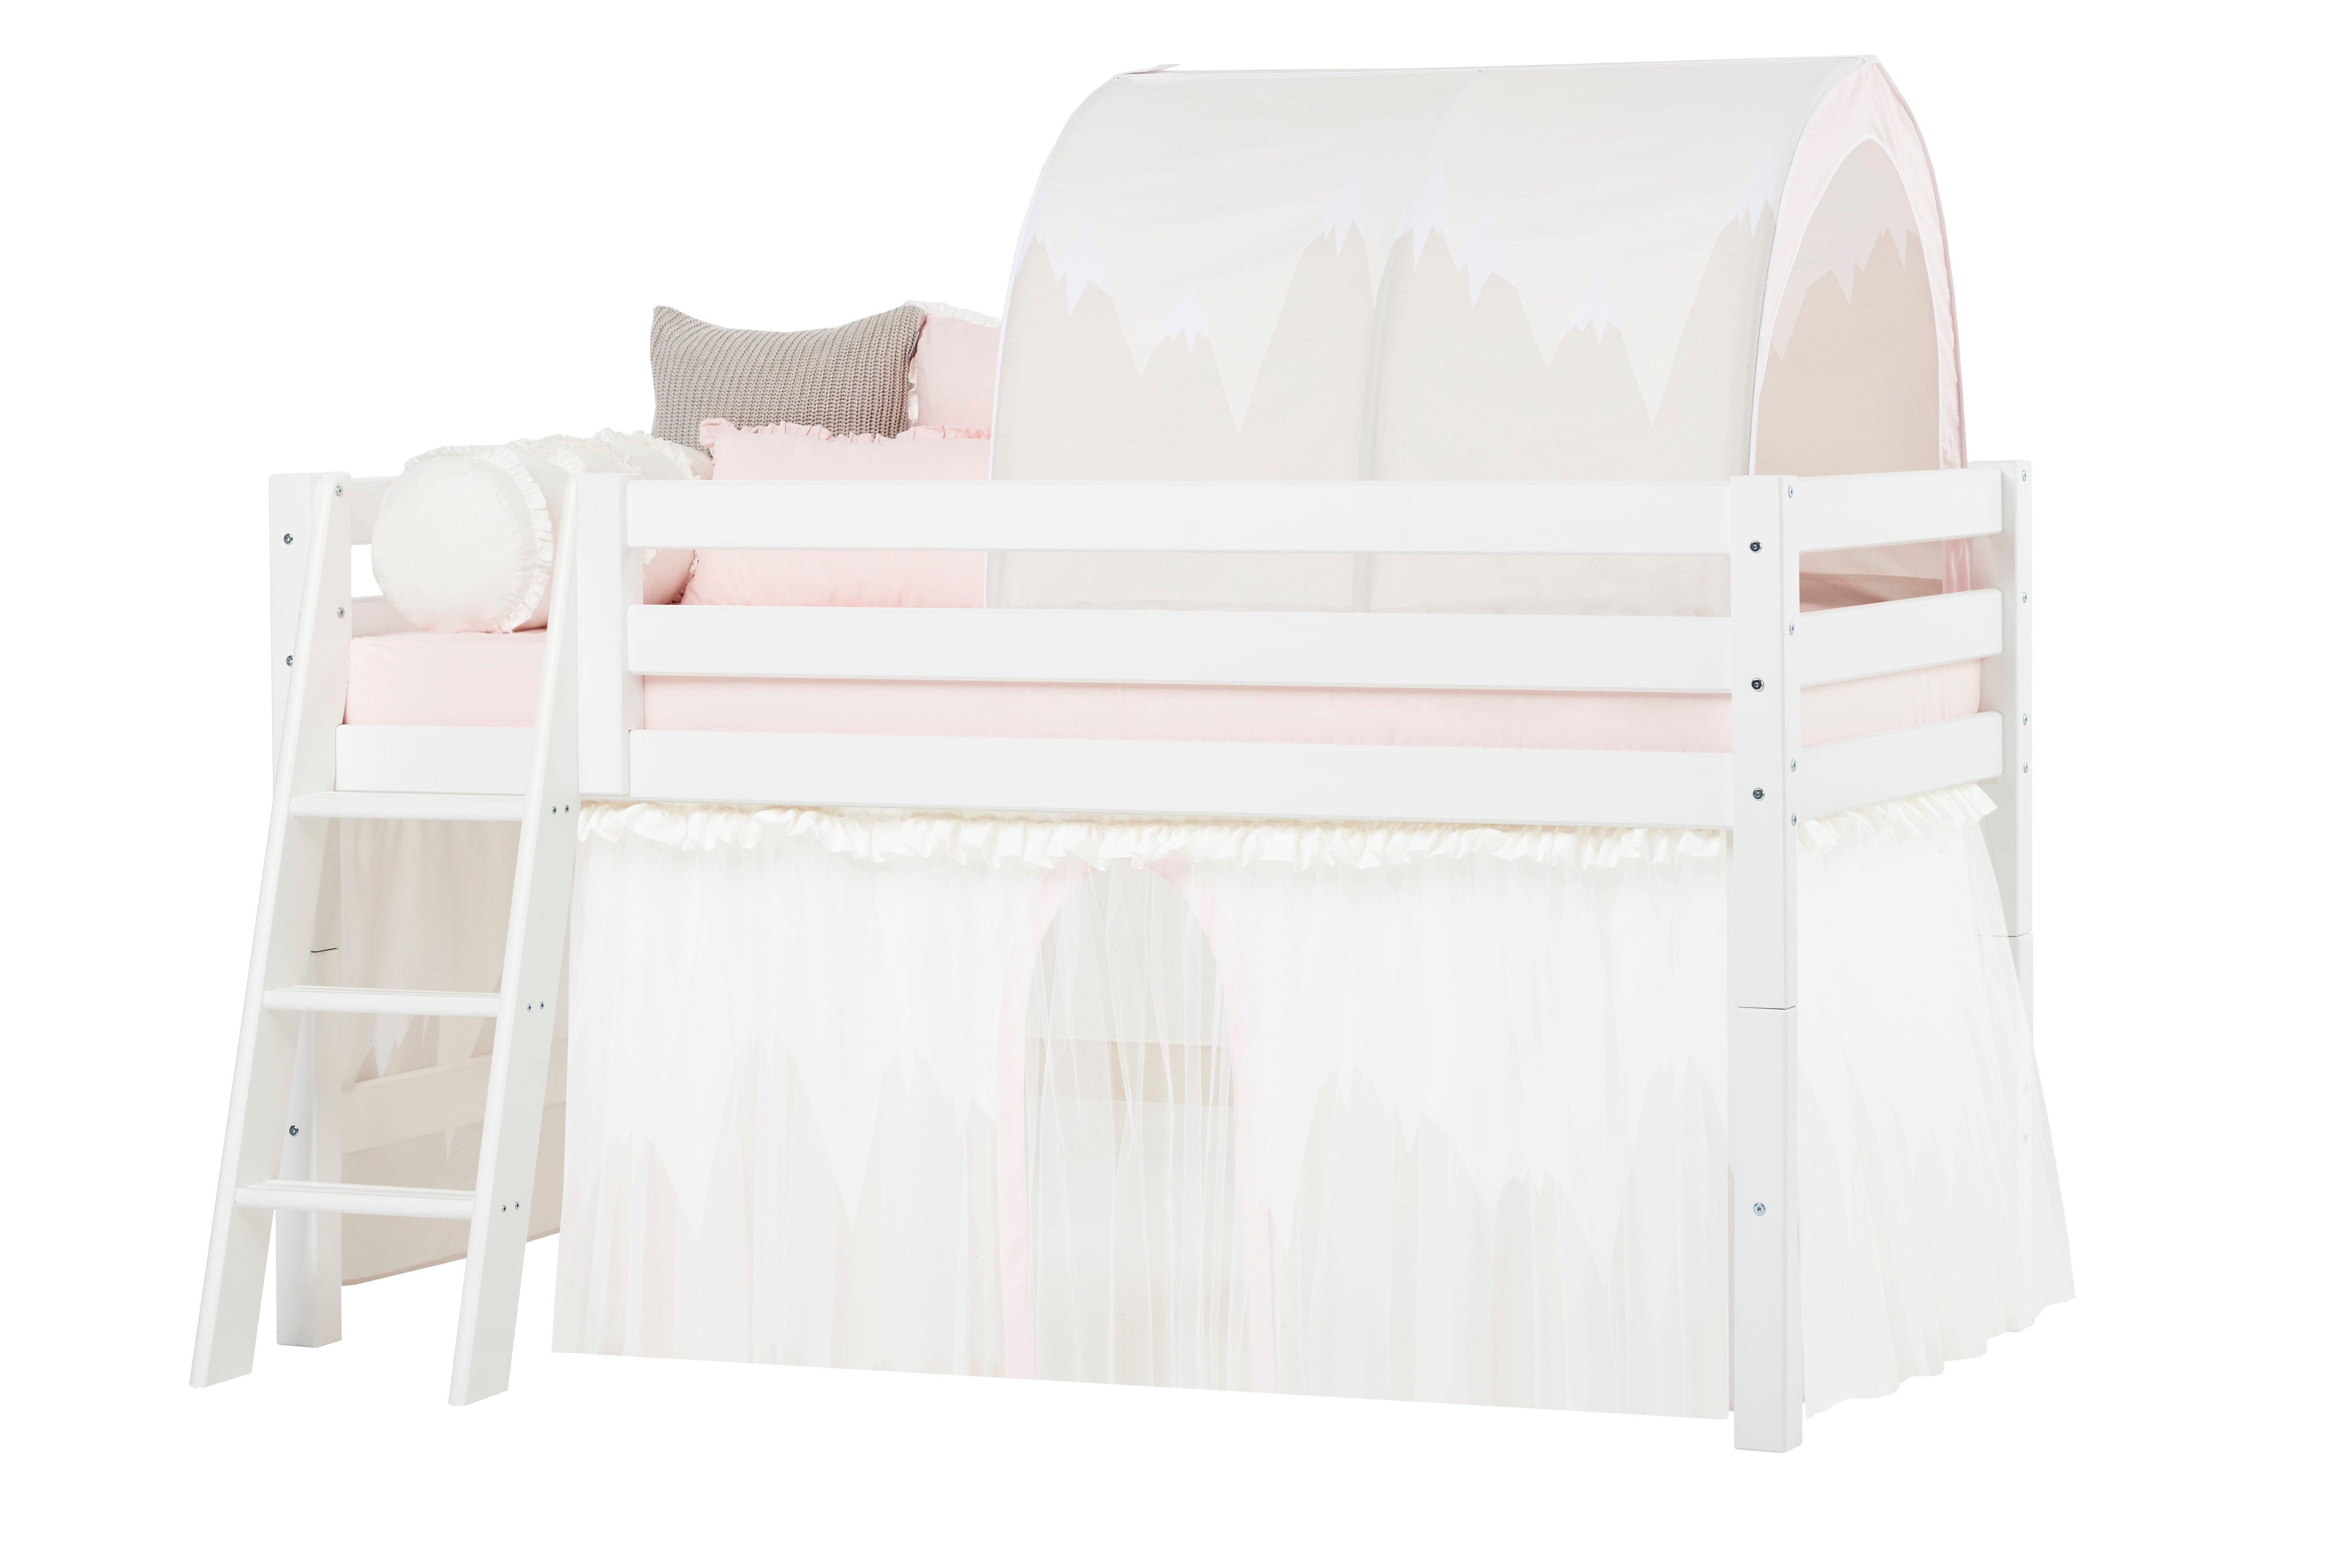 Winter Wonderland Theme Package for Hoppekids Half-high and Mid-high Bed